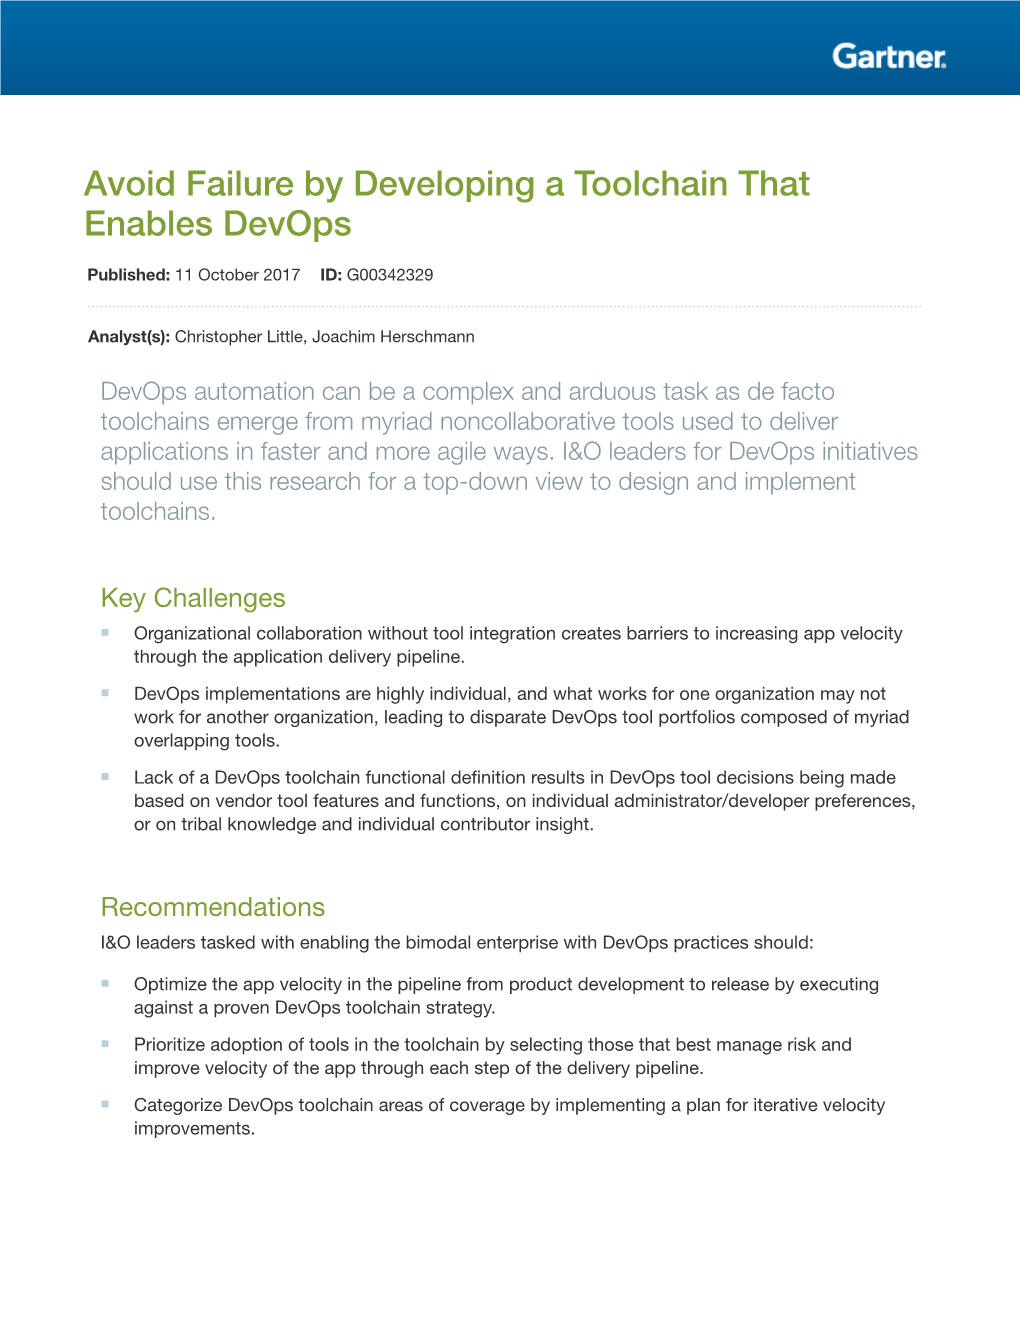 Avoid Failure by Developing a Toolchain That Enables Devops